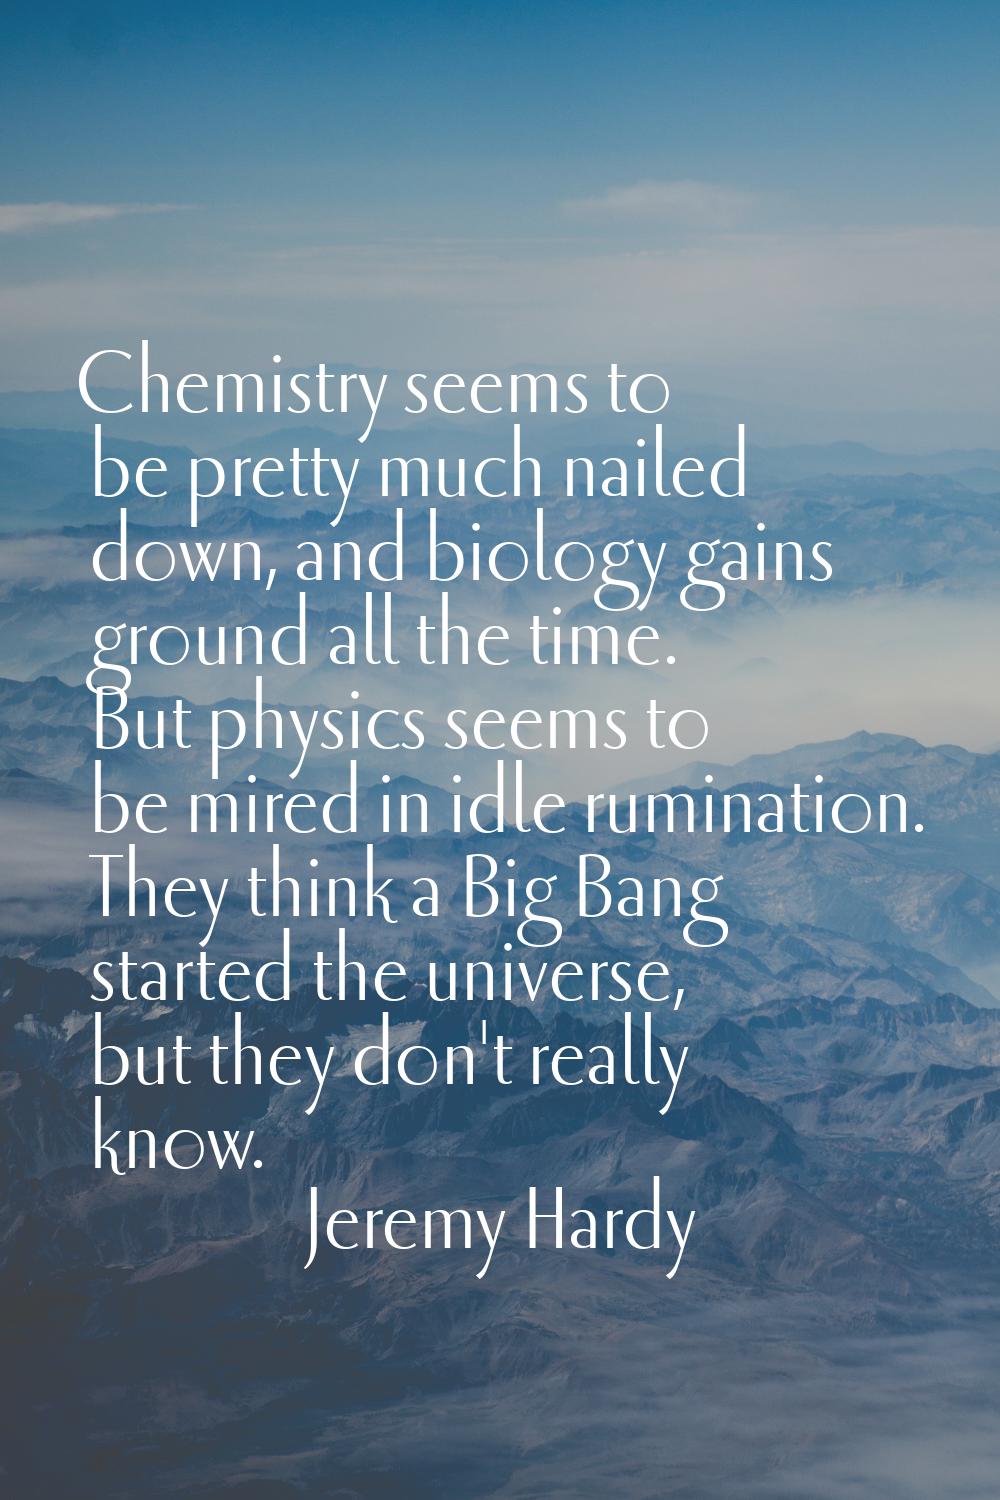 Chemistry seems to be pretty much nailed down, and biology gains ground all the time. But physics s